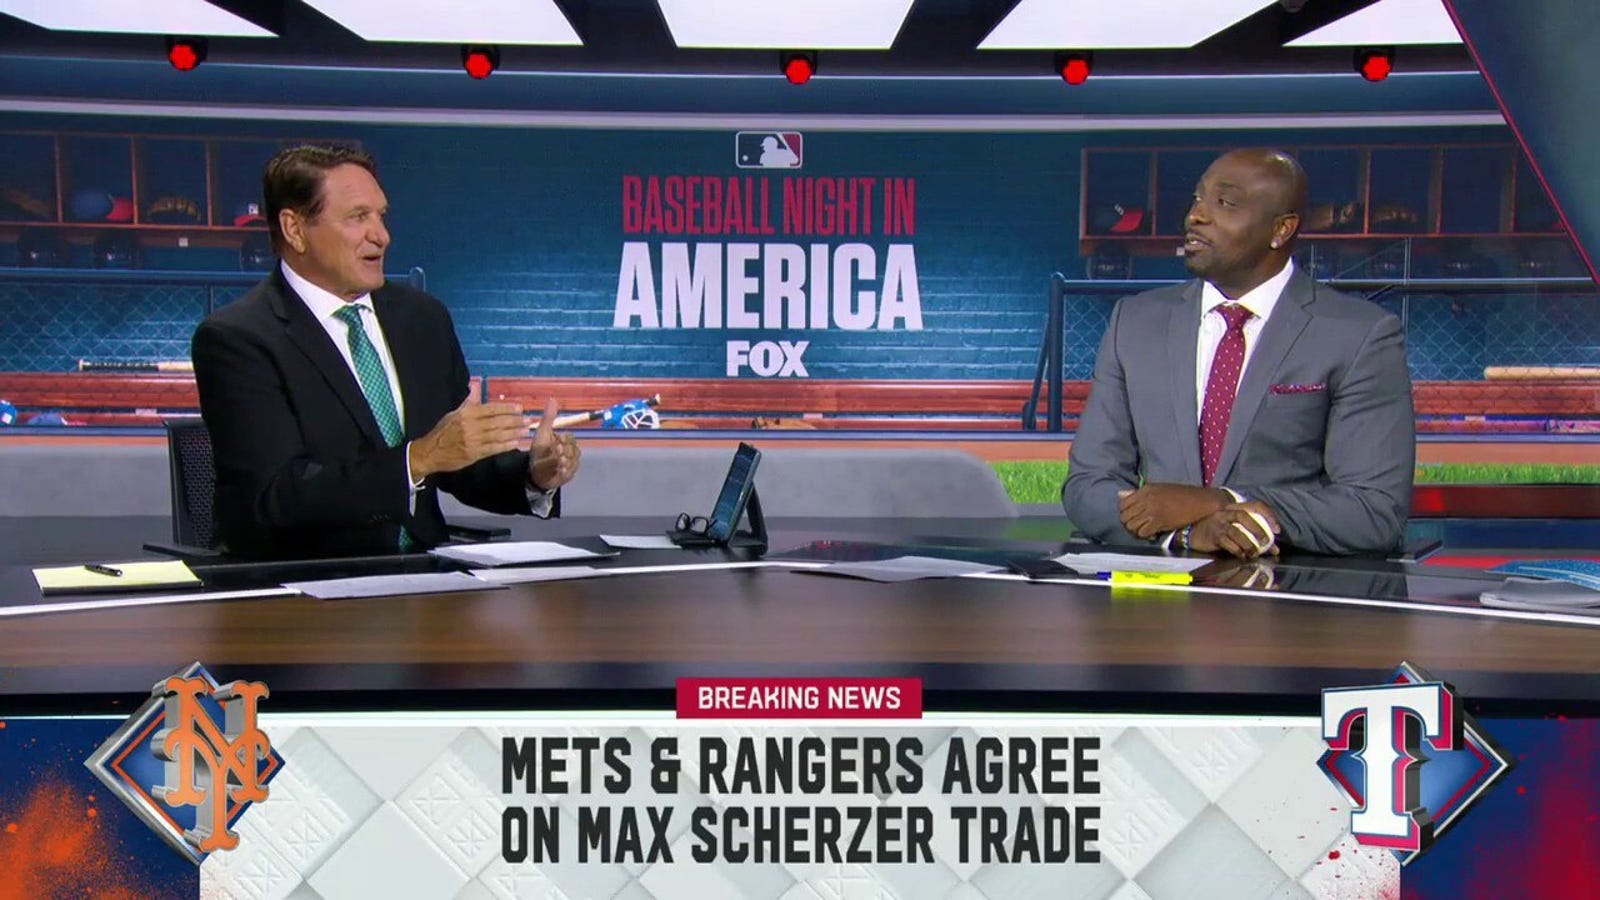 The Rangers have reached an agreement to acquire Max Scherzer from the Mets, per Ken Rosenthal